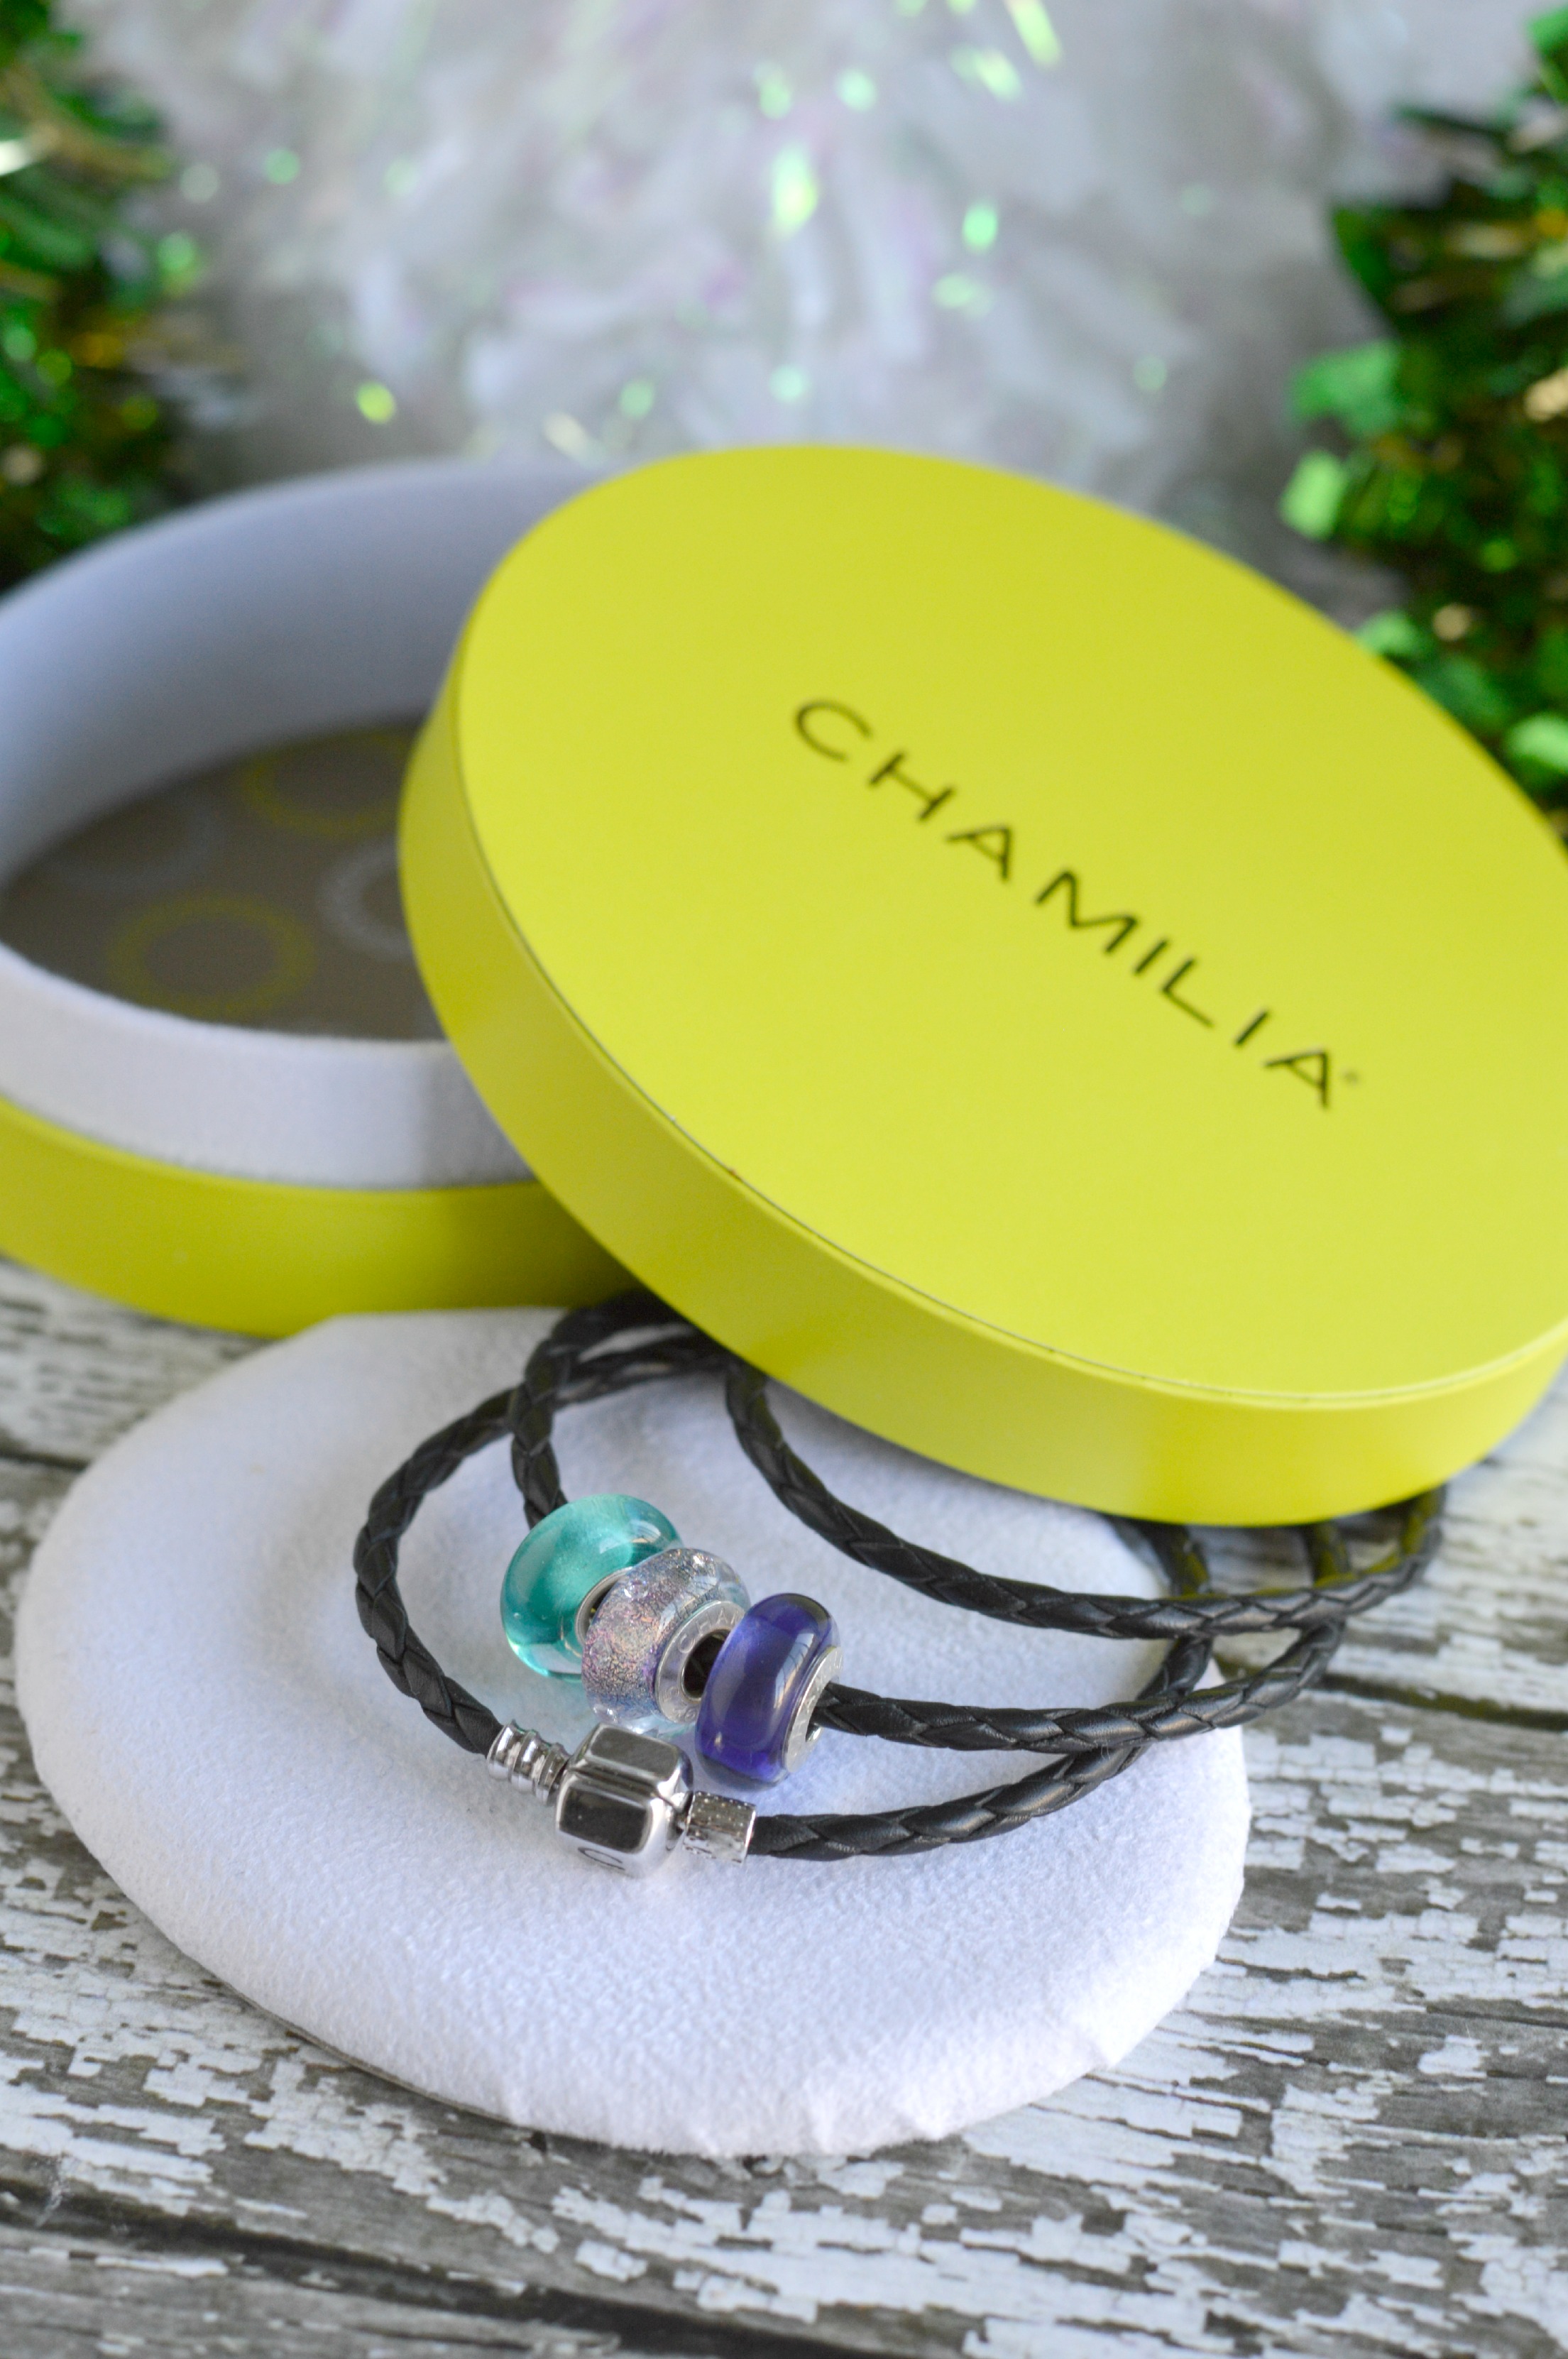 Bring Home Something Amazing From Chamilia pic